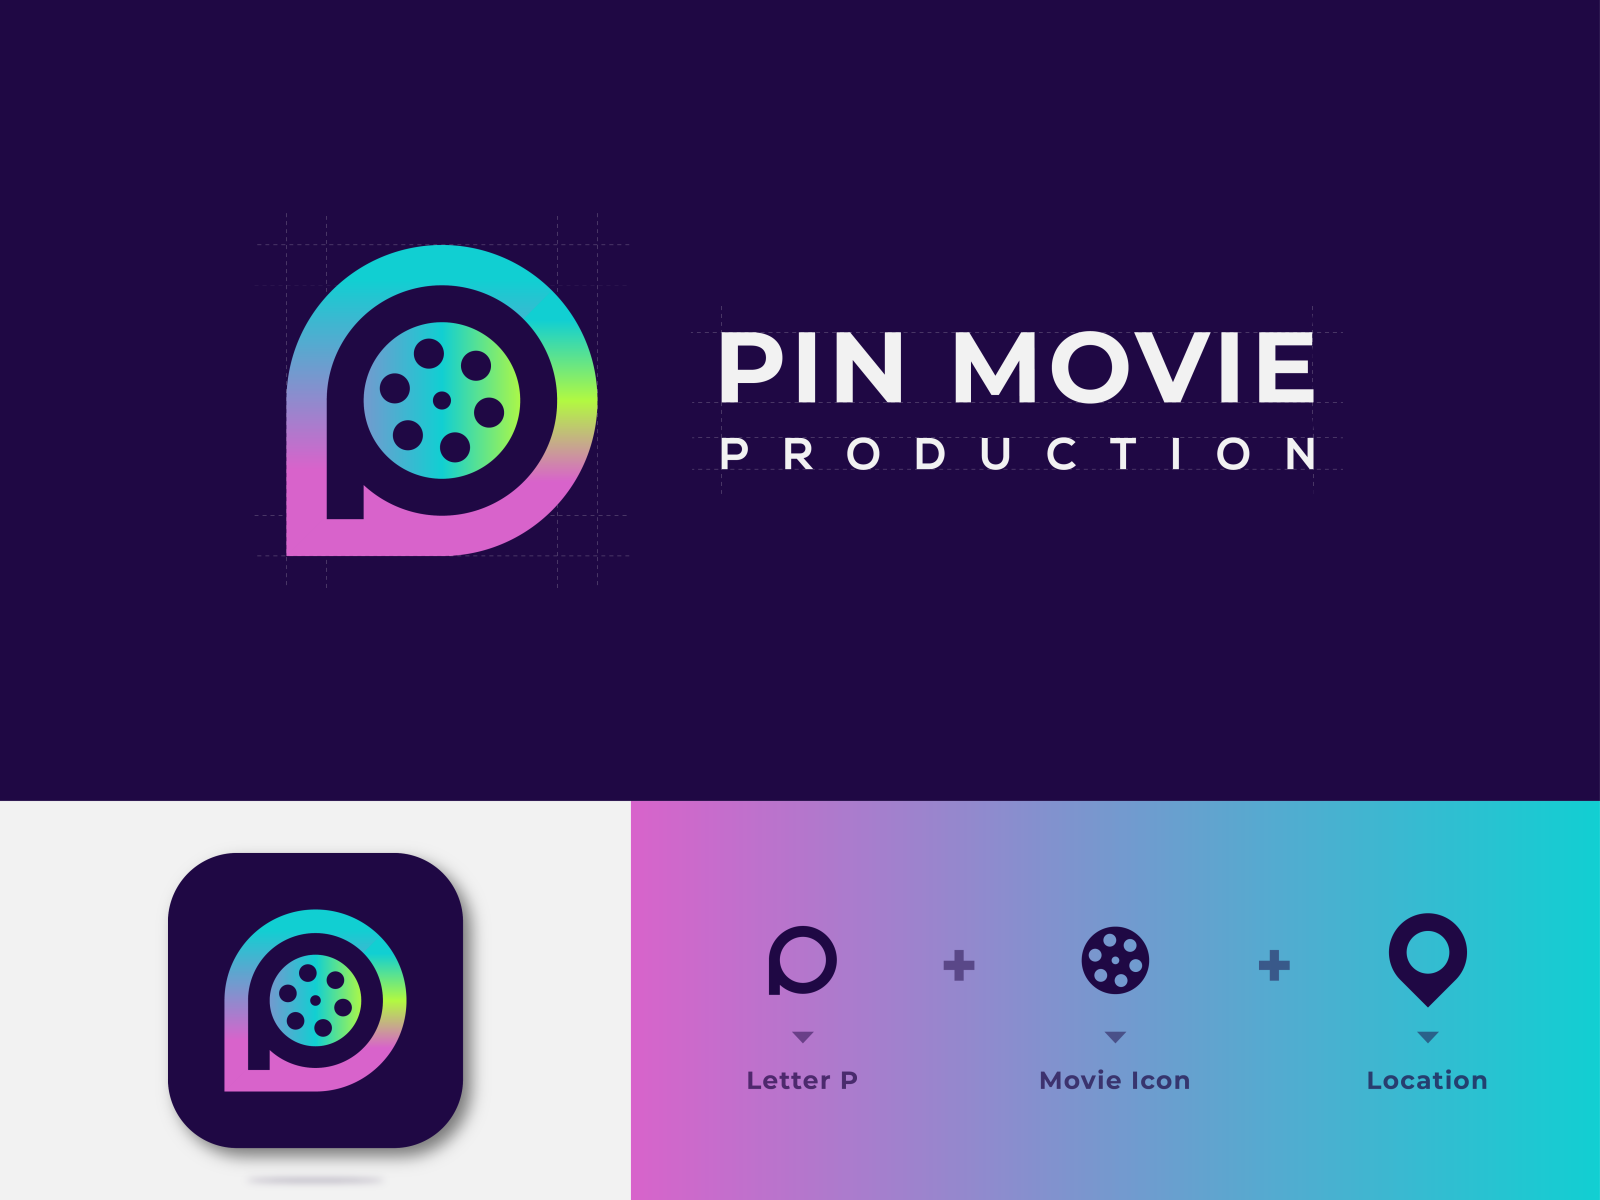 Pin Movie Production ( Letter P + Movie Icon + Location )